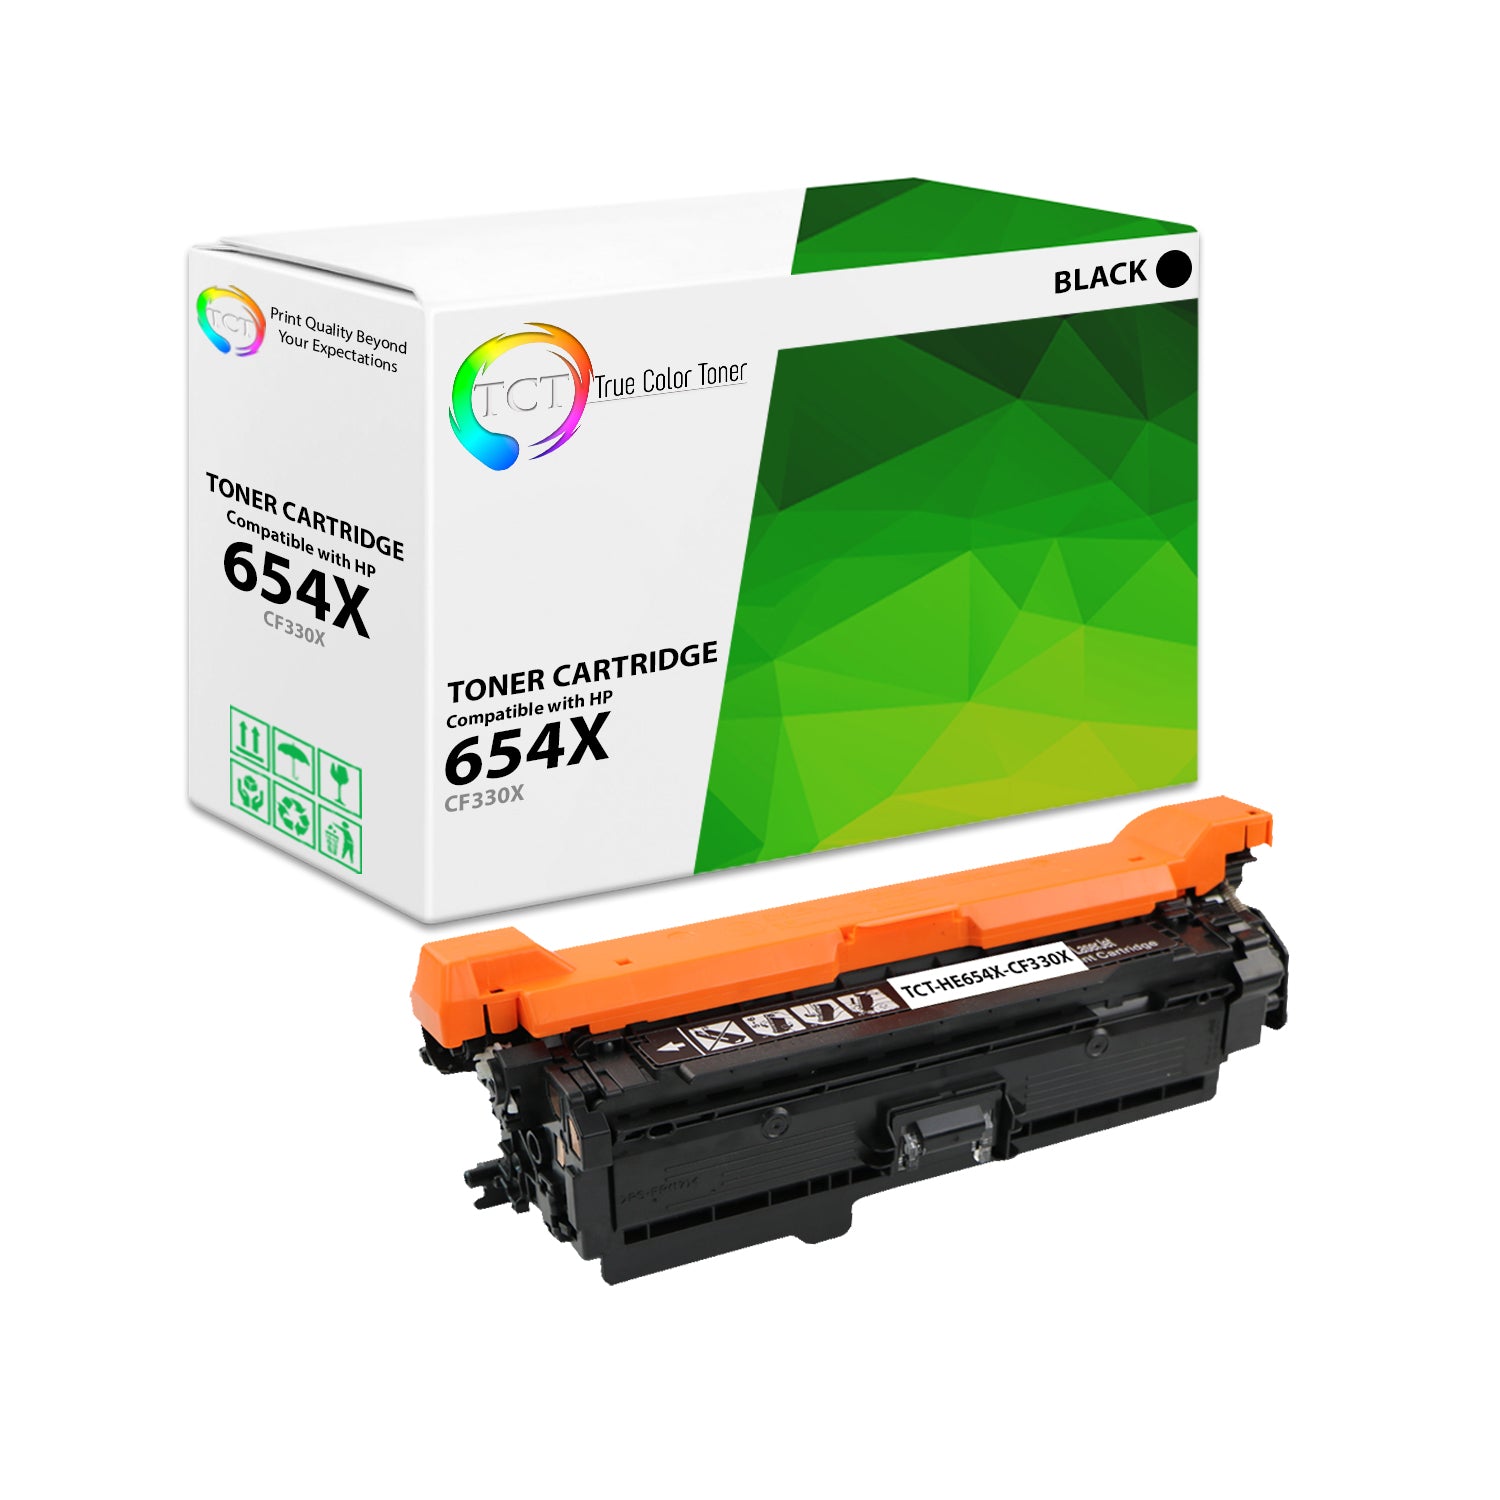 TCT Compatible HY Toner Cartridge Replacement for the HP 654X Series - 1 Pack Black